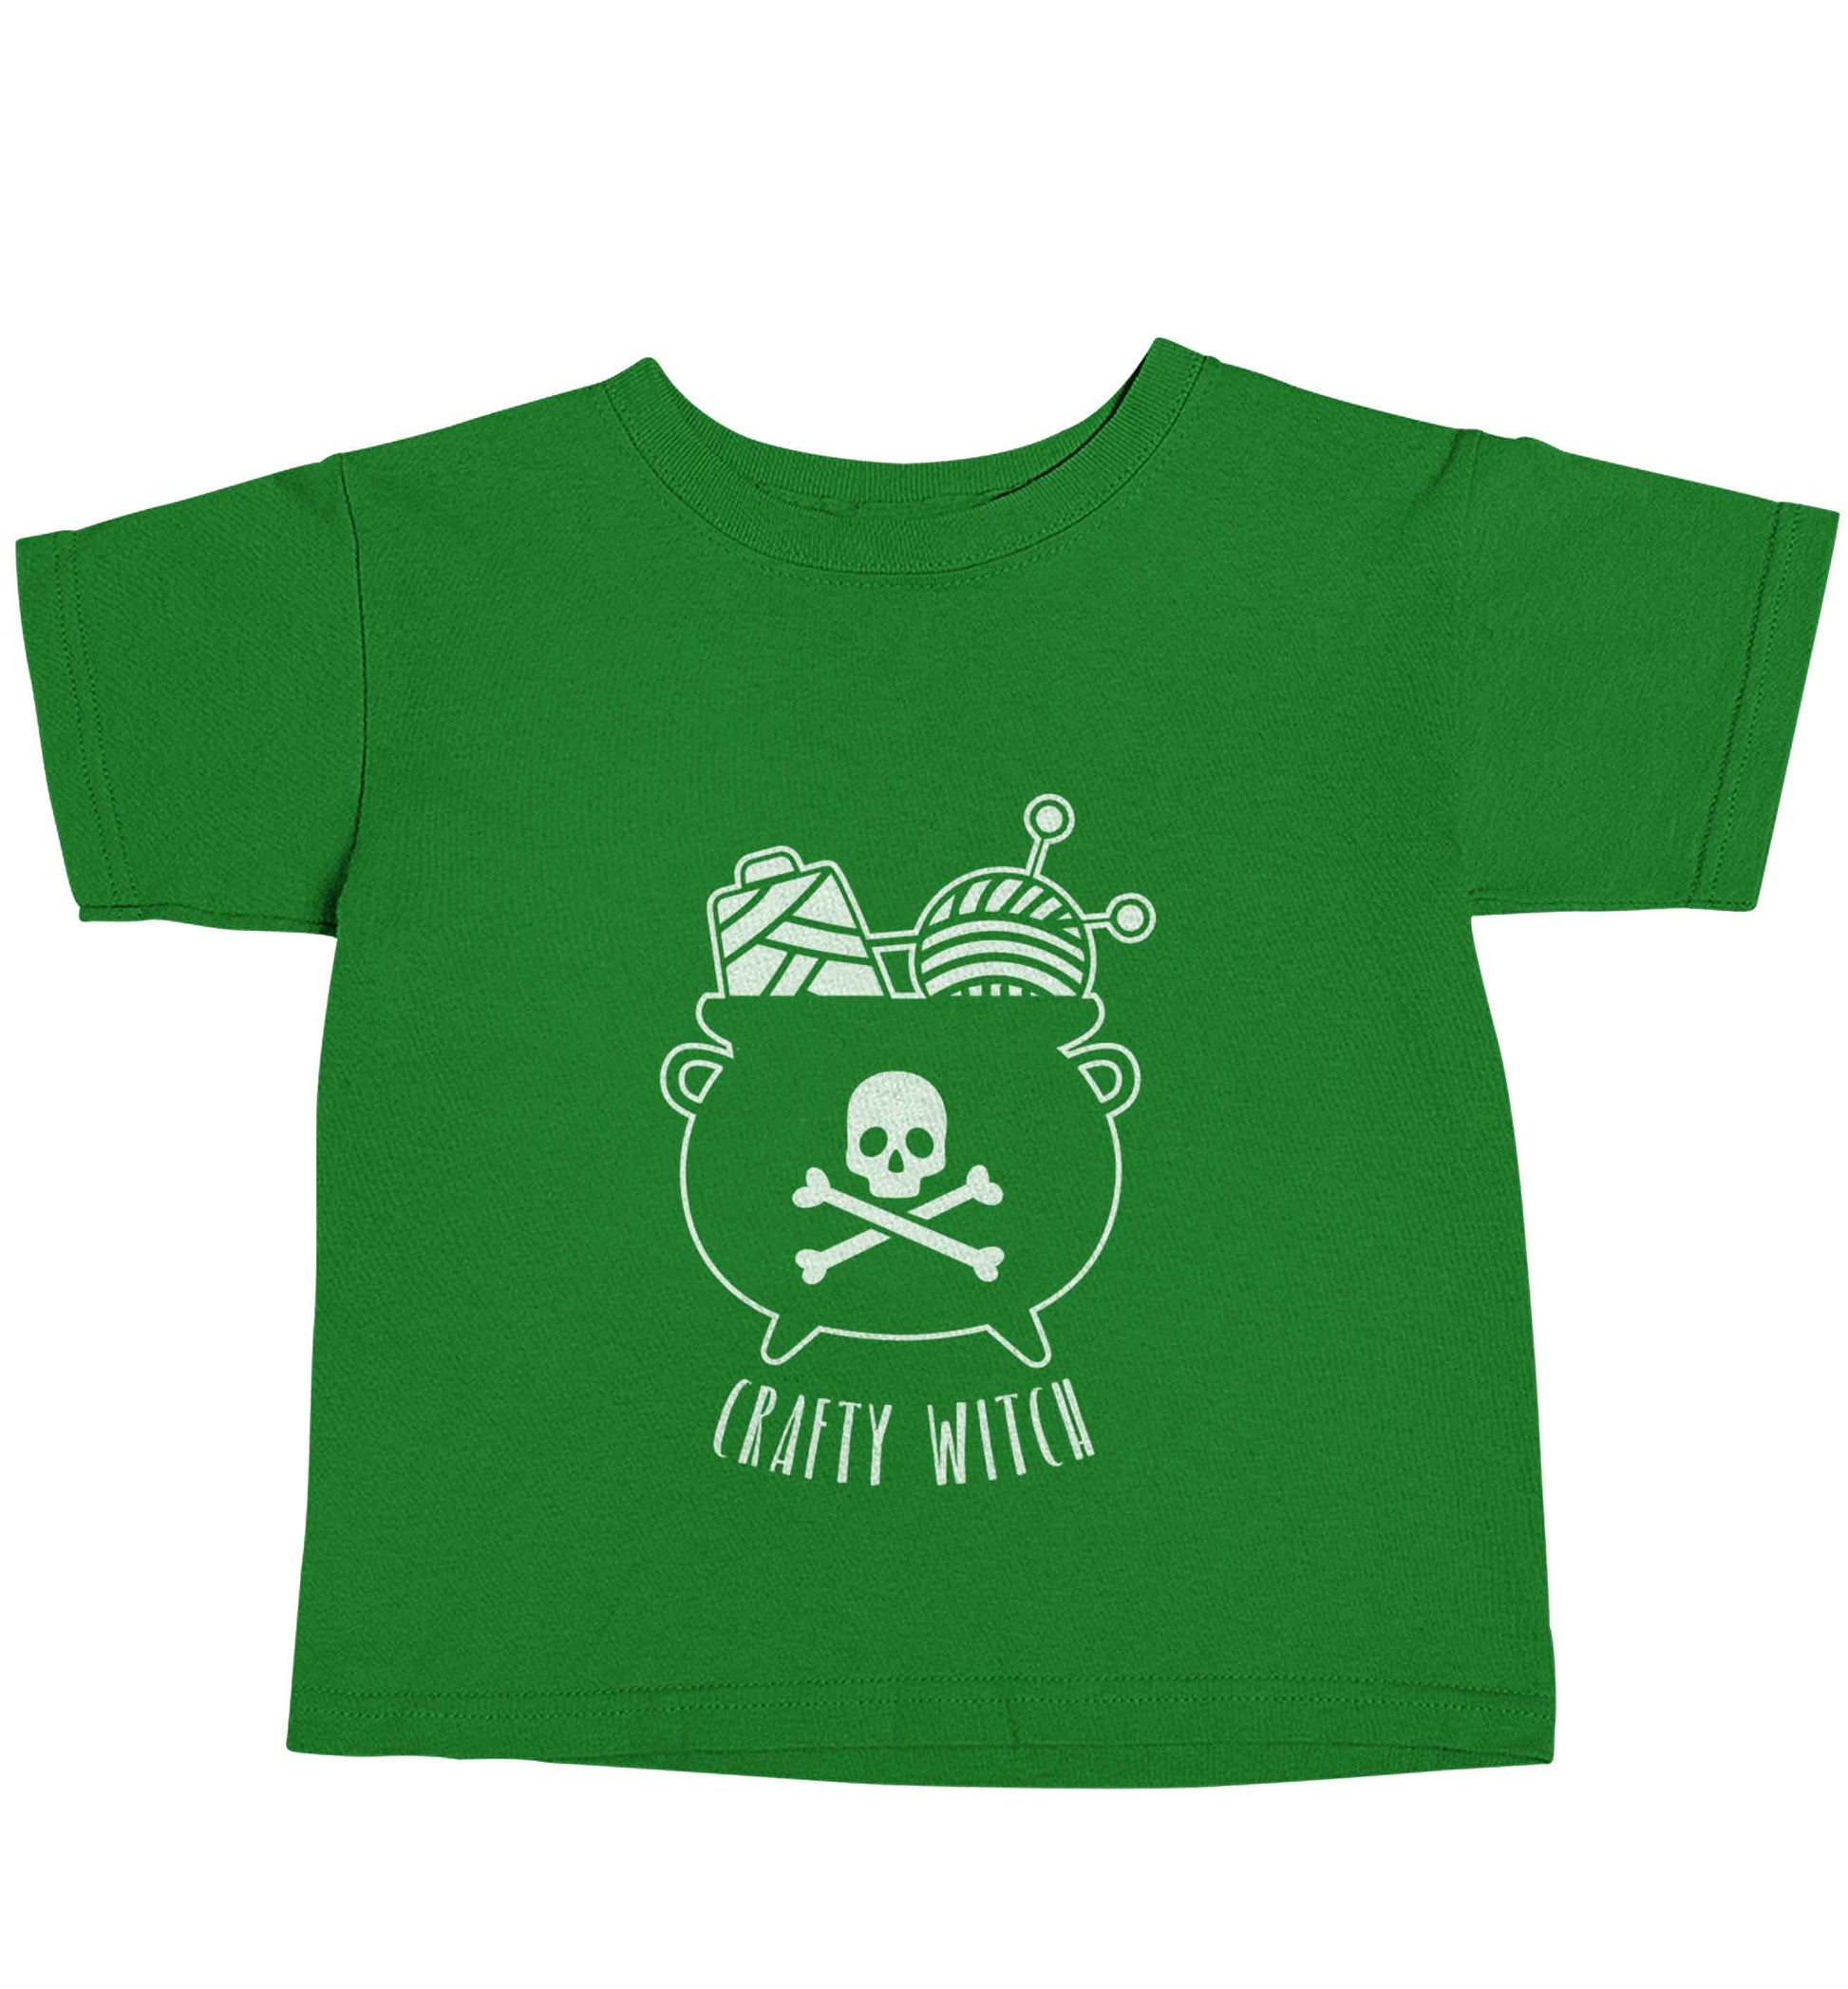 Crafty witch green baby toddler Tshirt 2 Years